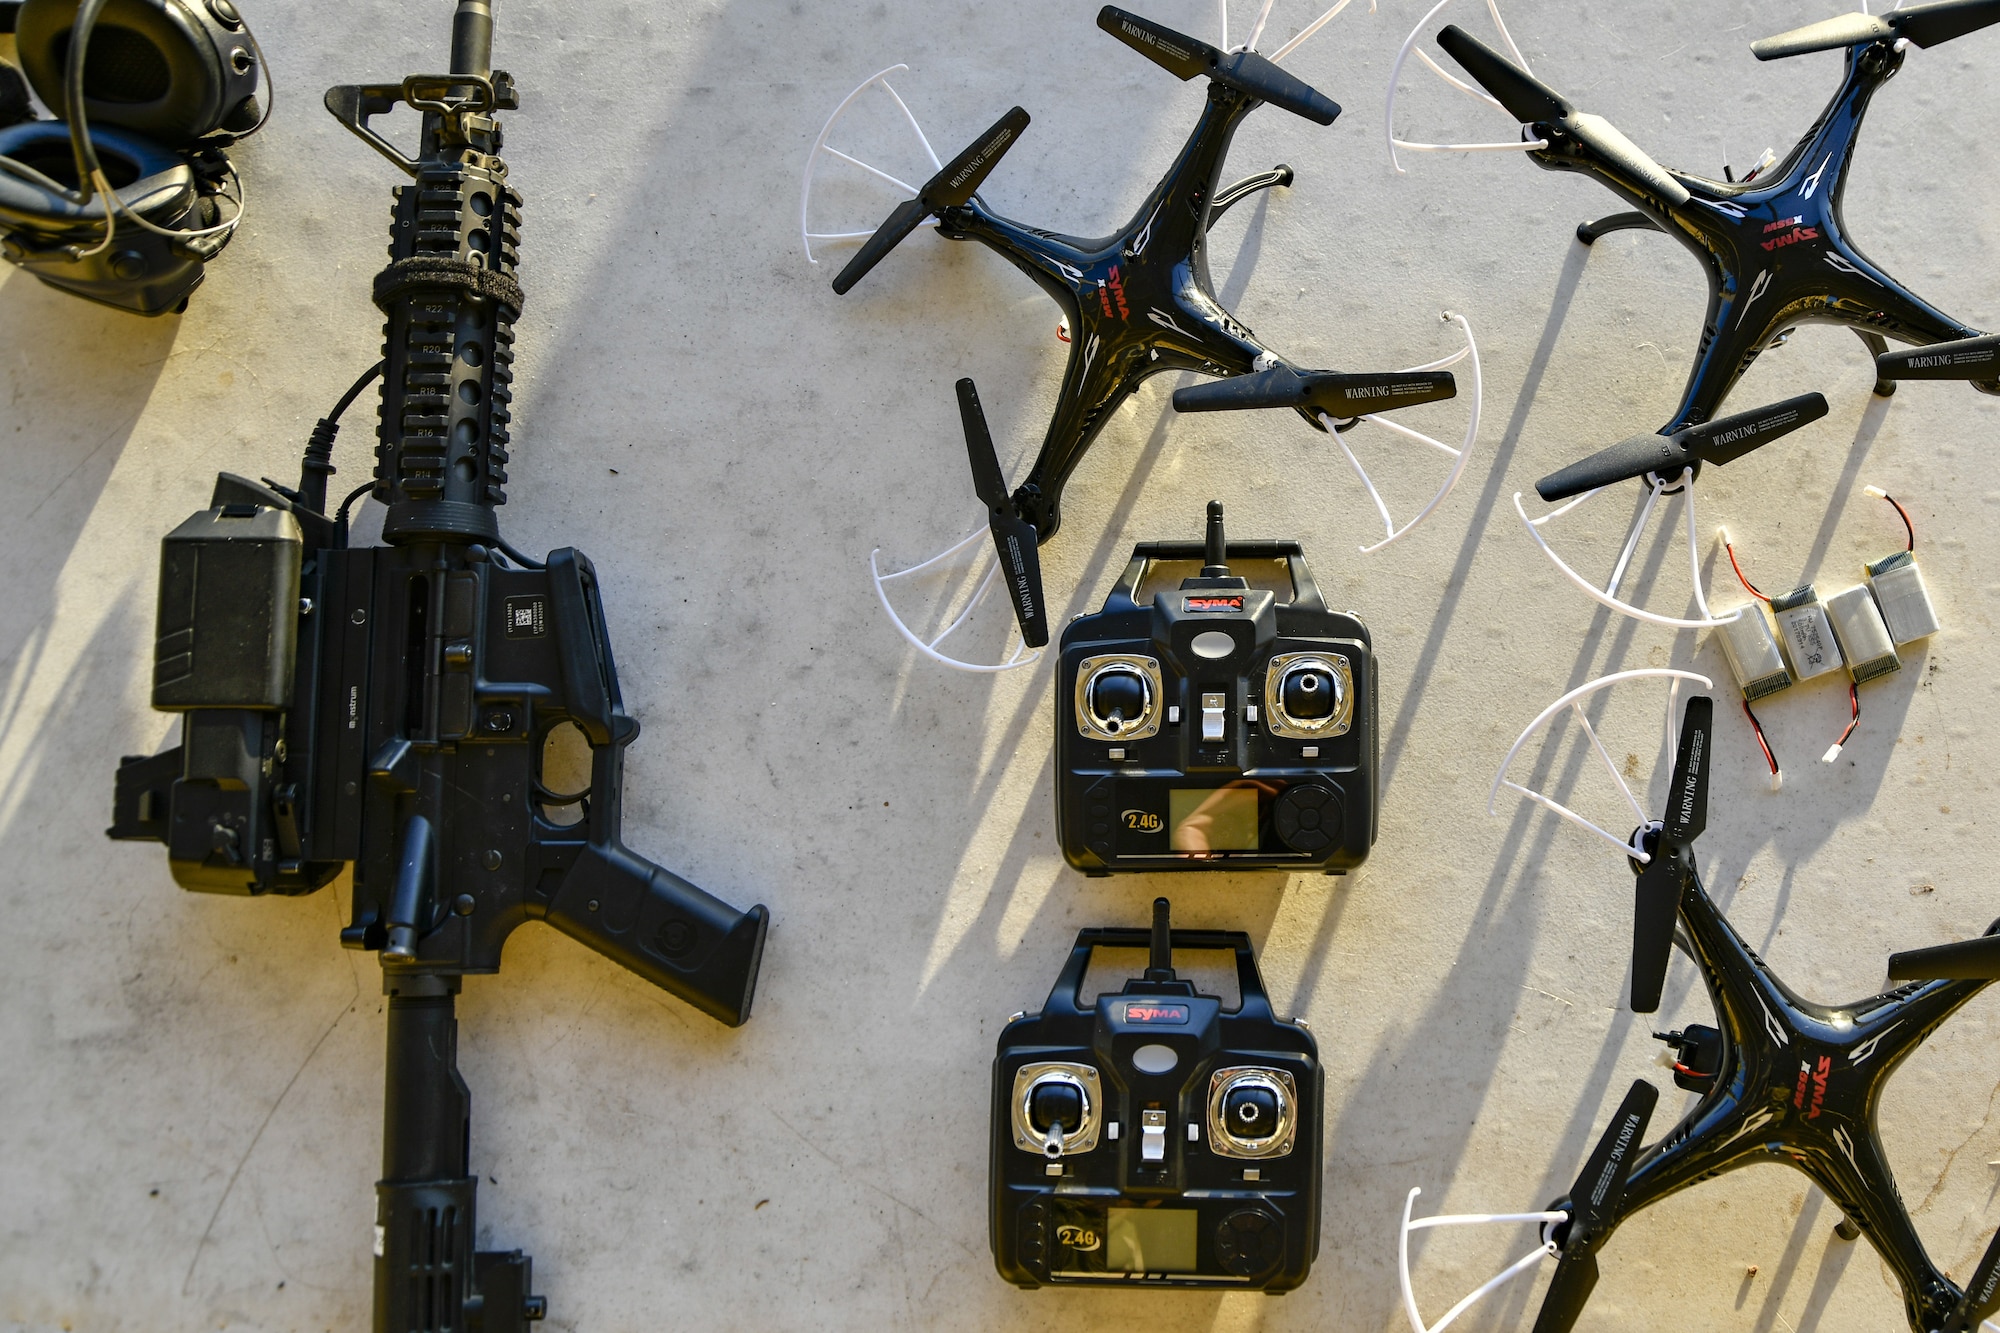 A M4 Carbine rifle donning the Smart Shooter sighting device lays next to drones that will be used as moving targets for 9th Reconnaissance Wing leadership at Beale Air Force Base, California, Aug. 14, 2019. The sighting device attaches to the weapon and locks on then fires to neutralize its target with or without movement. The device is also being used to limit friendly fire as the weapon cannot be fired unless it is purposely locked on. (U.S. Air Force photo by Tech. Sgt. Alexandre Montes)